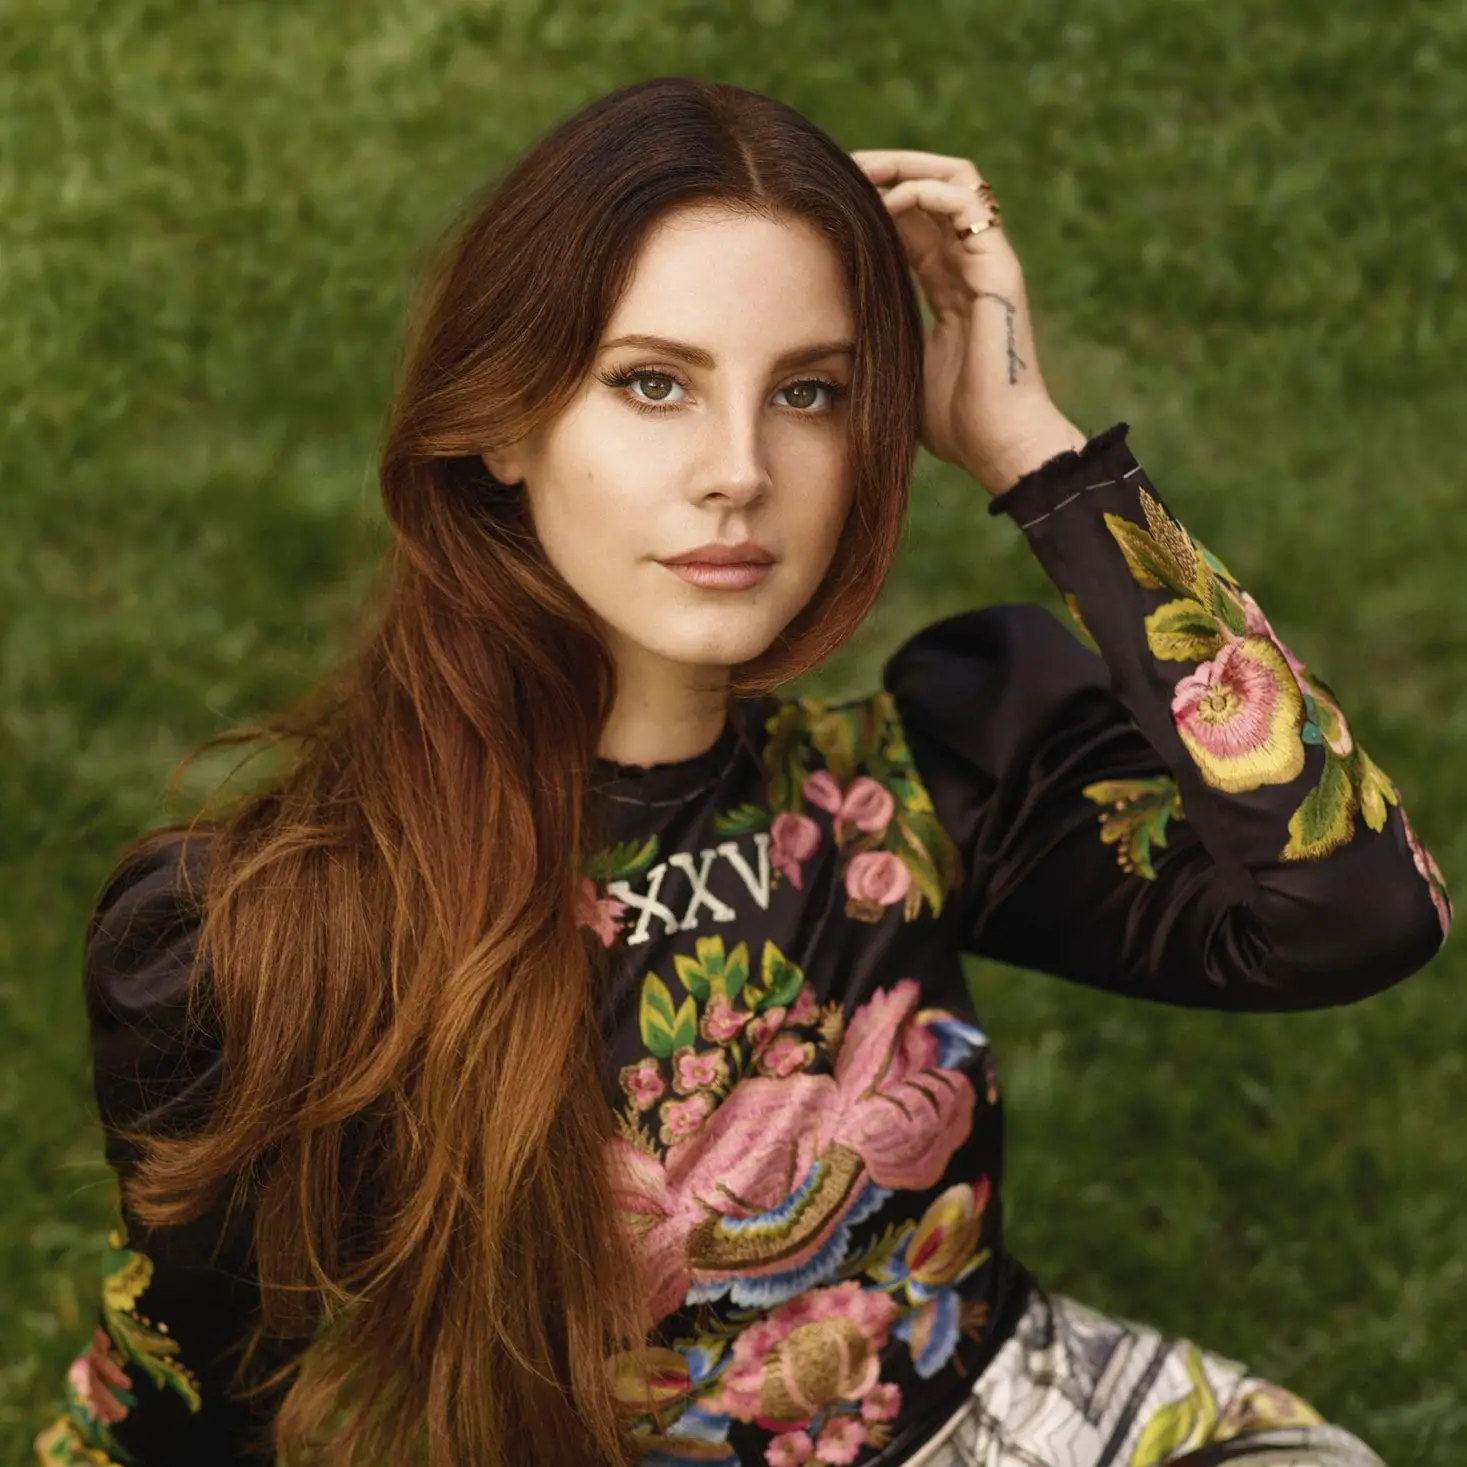 Lana Del Ray Faces Criticism Following The Artwork From Her New Album